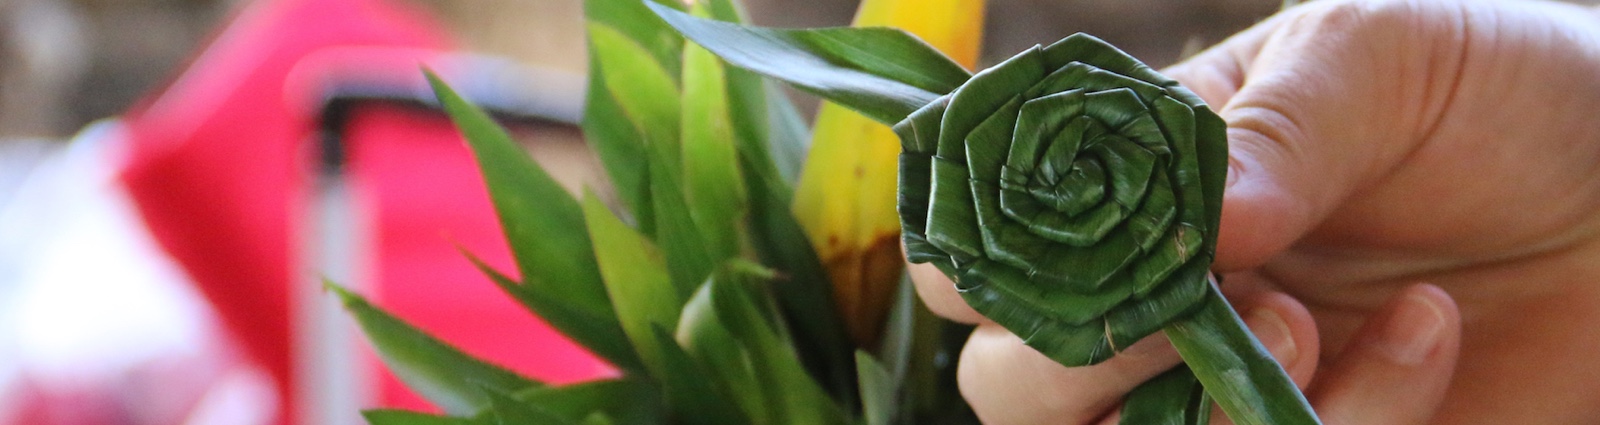 Leaf folded up into a decorative flower.